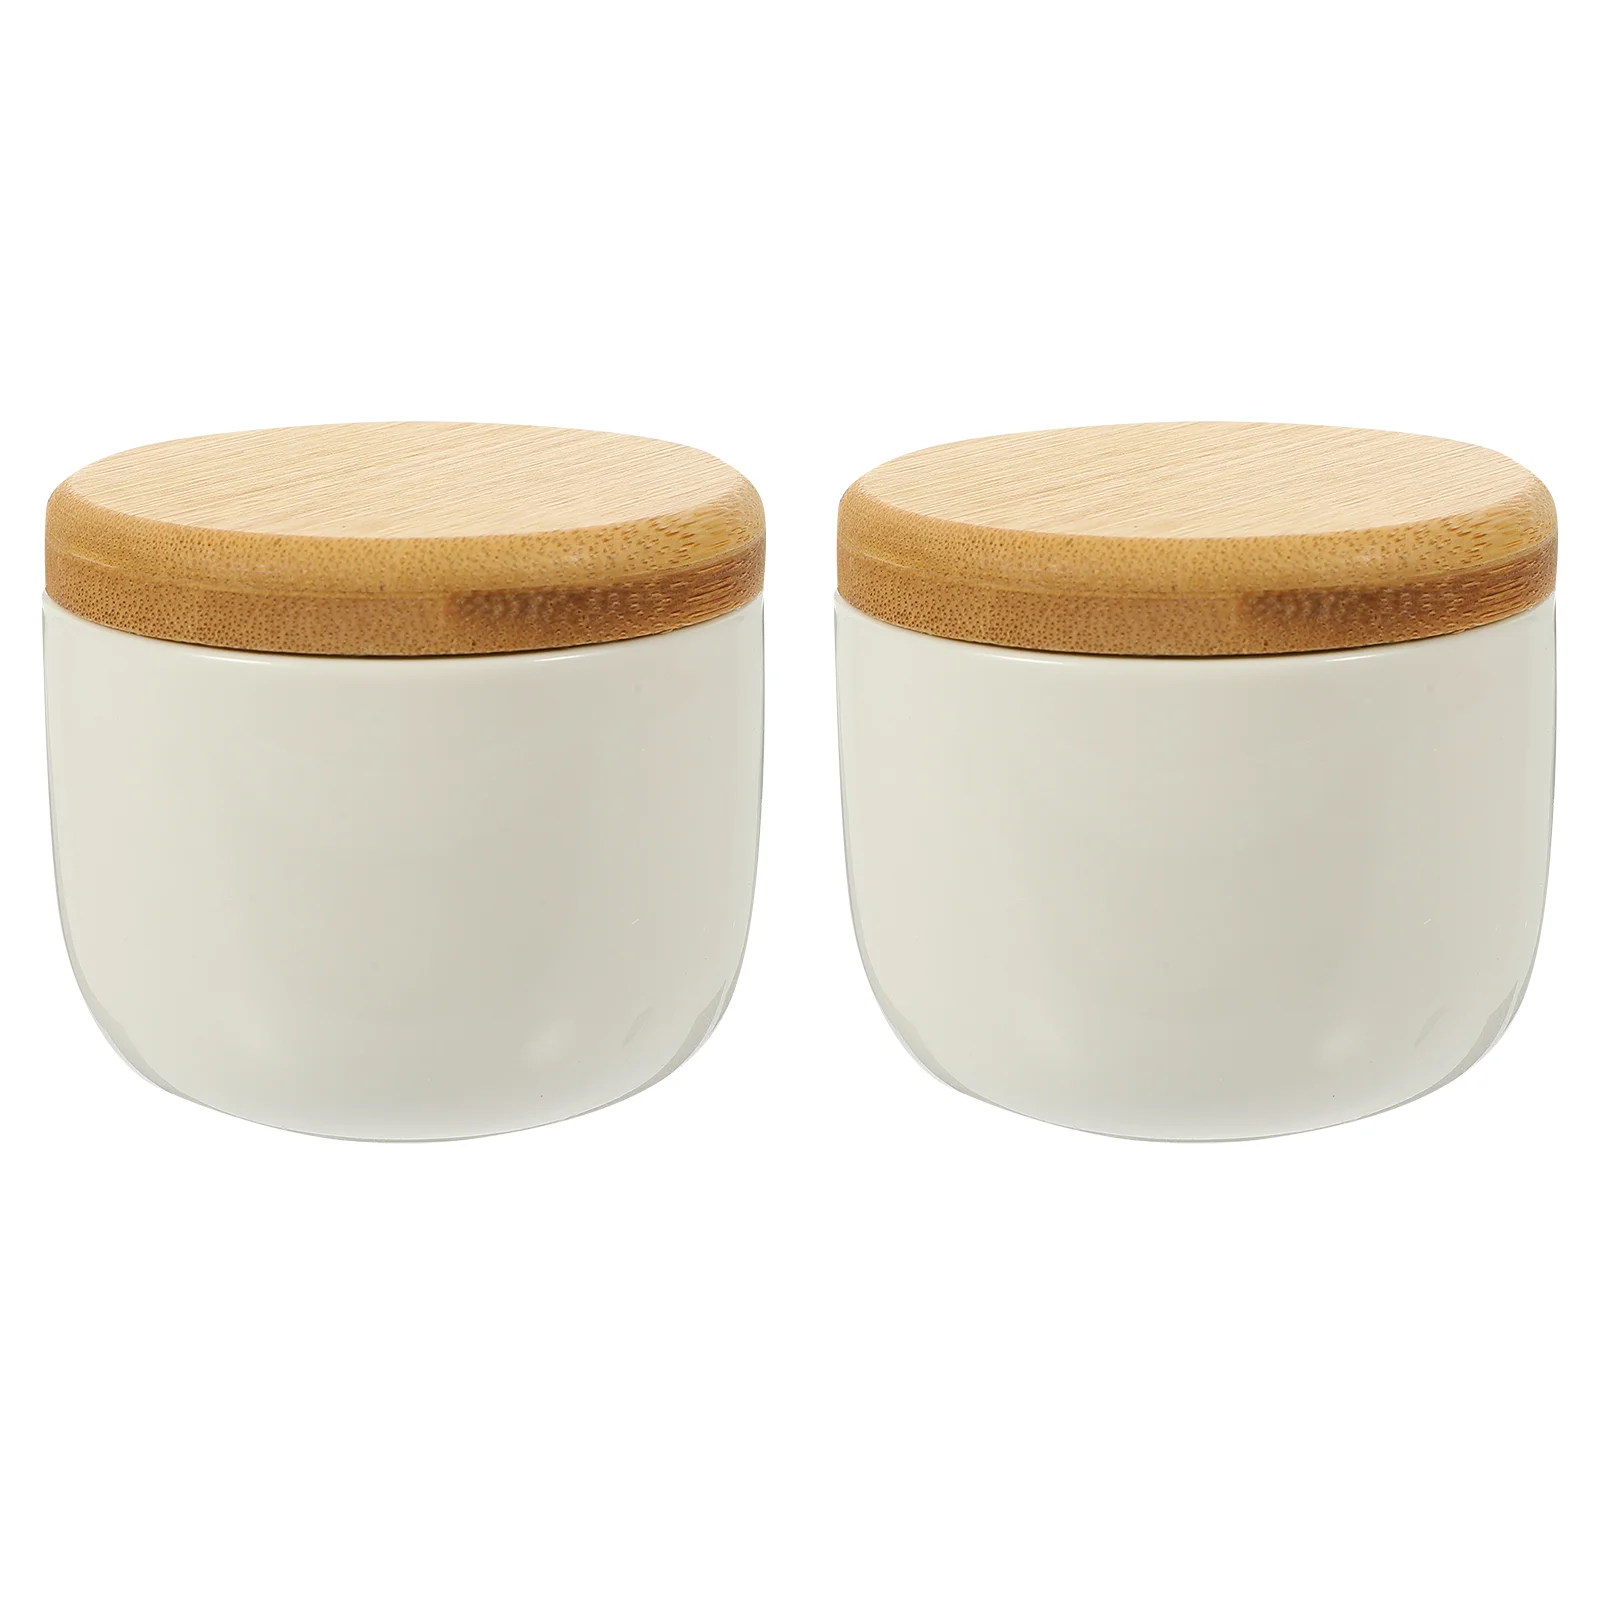 

2 Pcs Bamboo Lid Ceramic Jar Food Containers Tea Storage Canister Set Ceramics Portable Spice Sealed Grains Travel